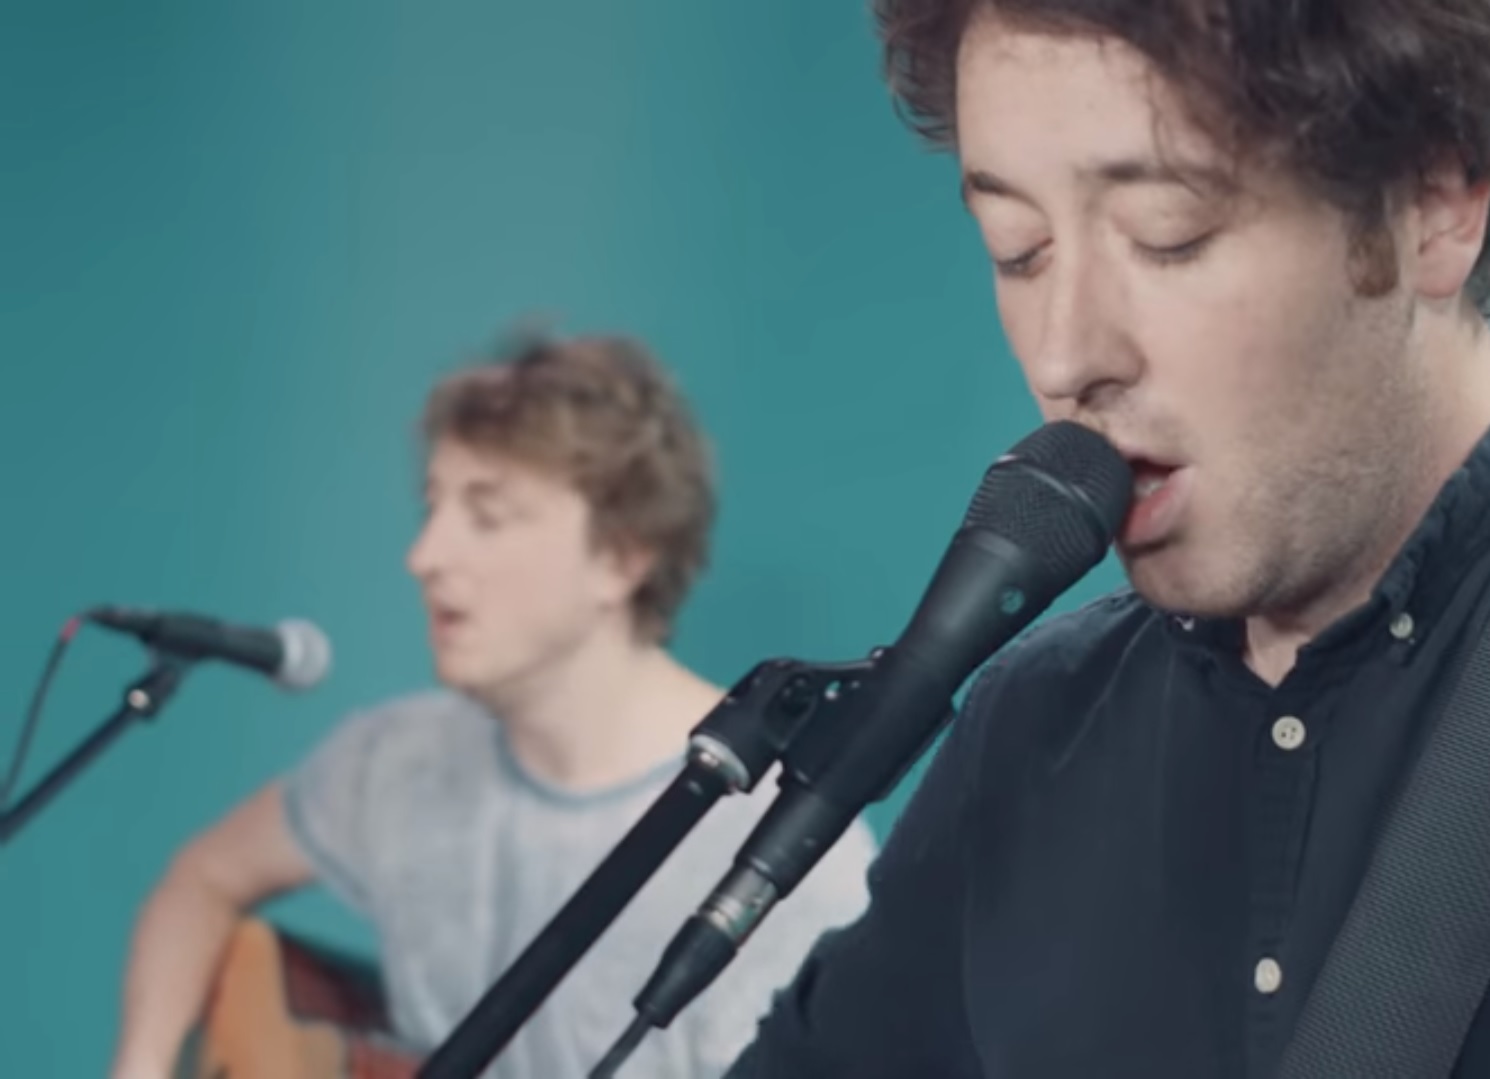 Watch Wombats Perform Acoustic Lemon to a Knife Fight pic